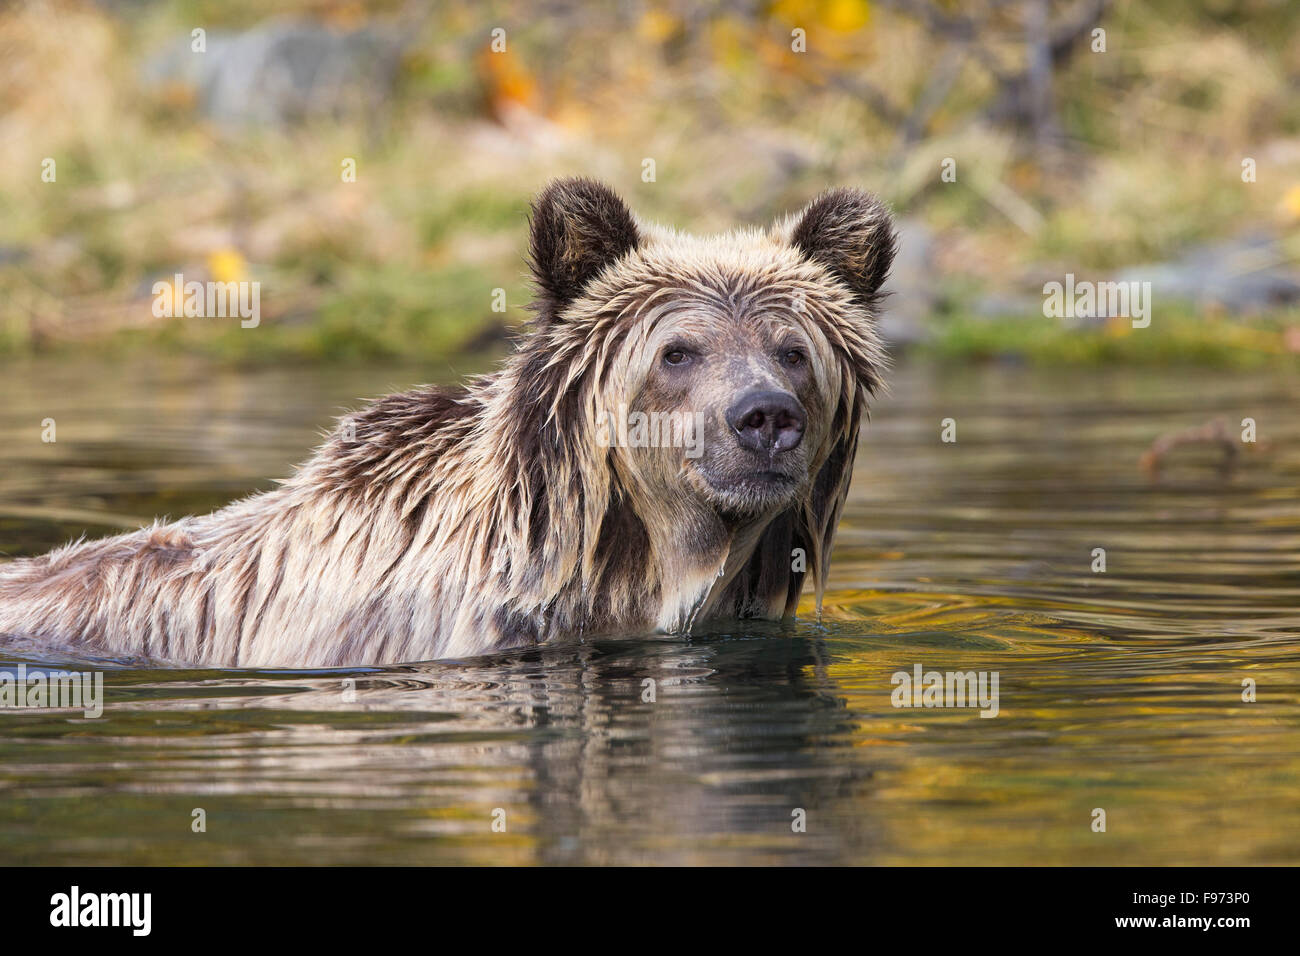 Grizzly bear (Ursus arctos horribilis), two year old cub in river, Central Interior, British Columbia. Stock Photo